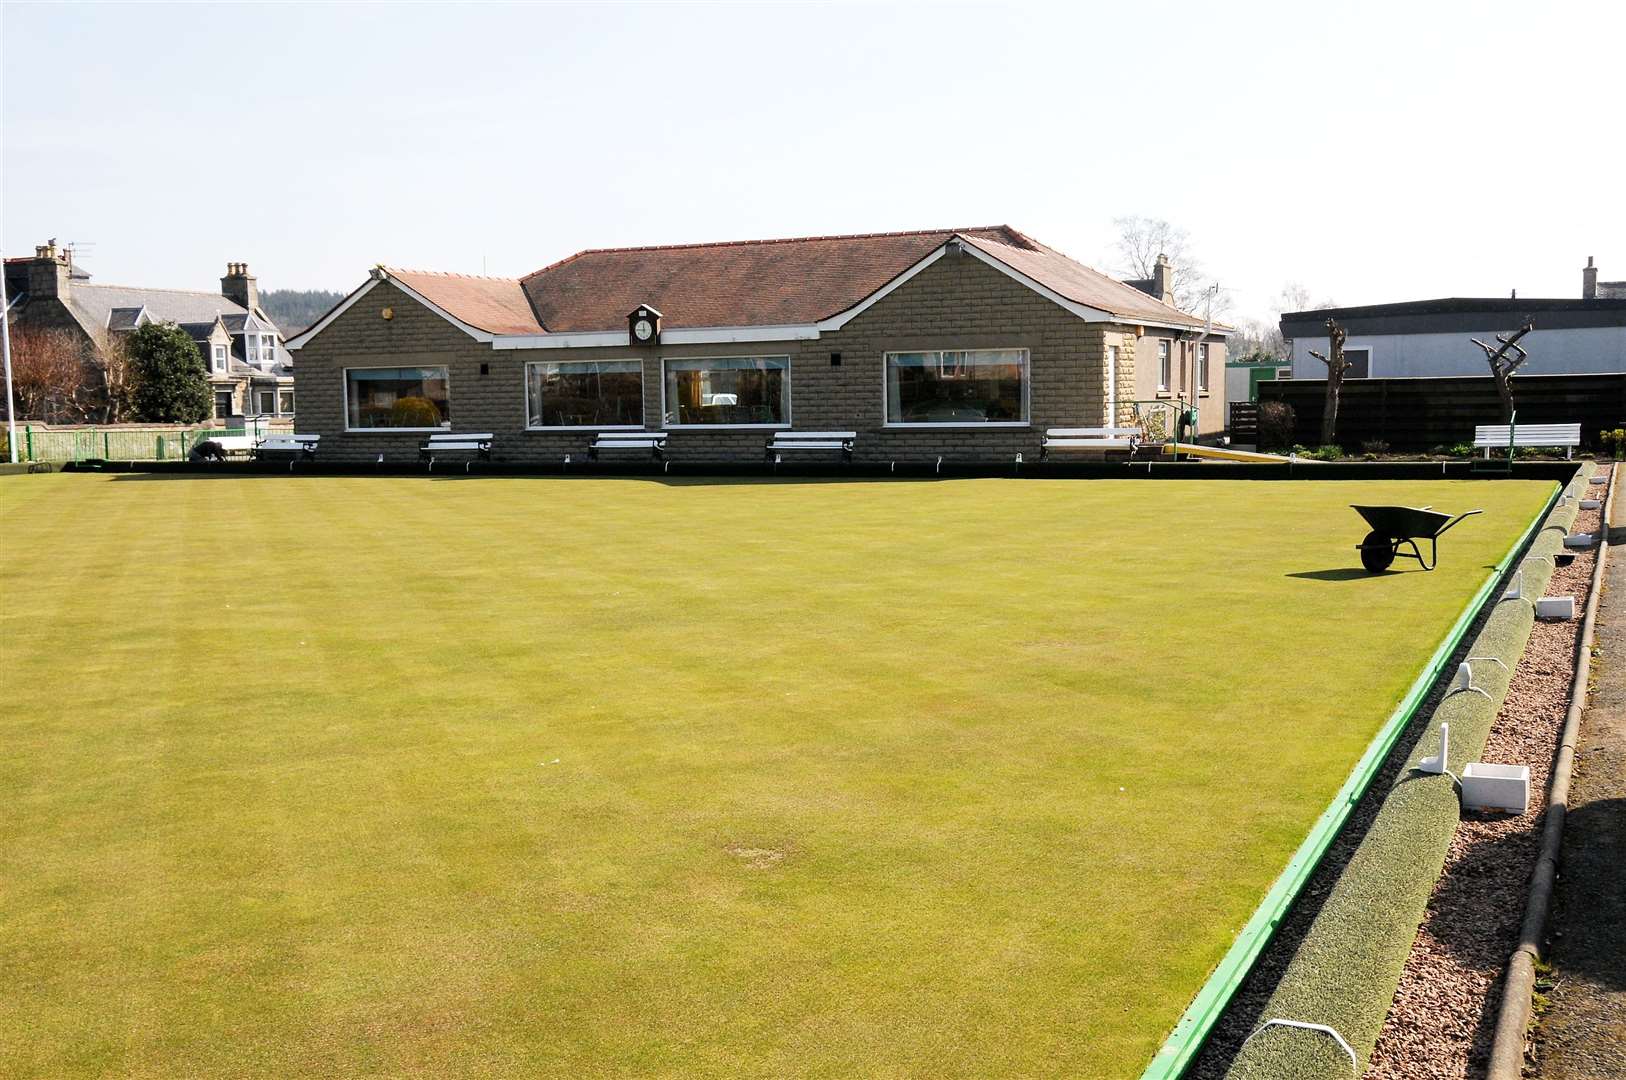 members are finally back on the green at Huntly Bowling Club.